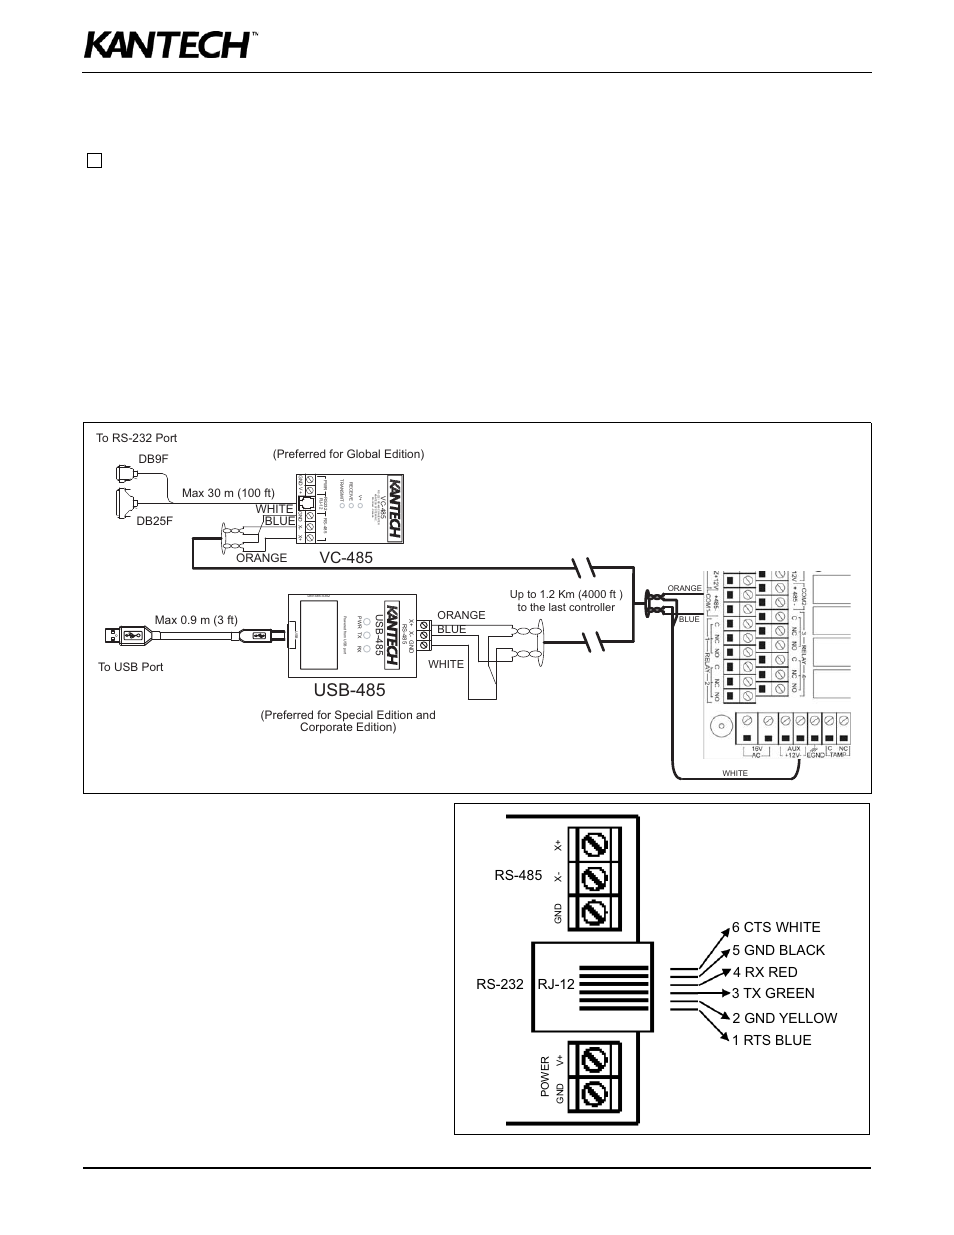 Usb-485, Vc-485, Rs-232 | Kantech KT-400 User Manual | Page 26 / 44